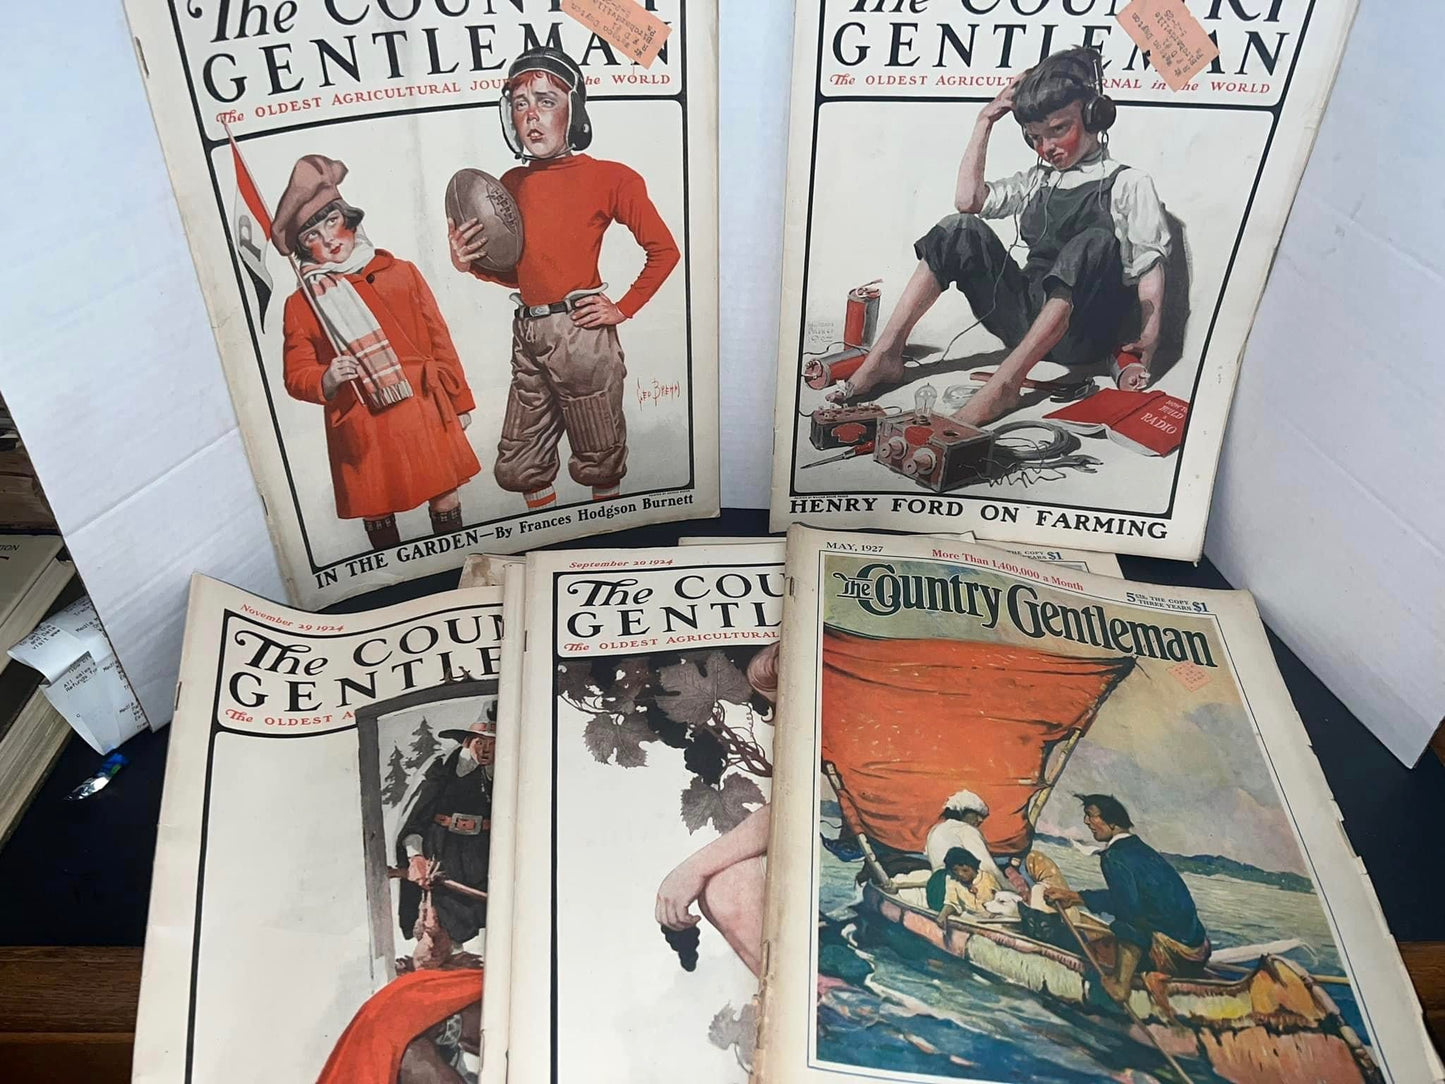 Antique magazine advertising Awesome collection of country gentleman magazines 1924-1926 — 11 volumes art deco era amazing advertising